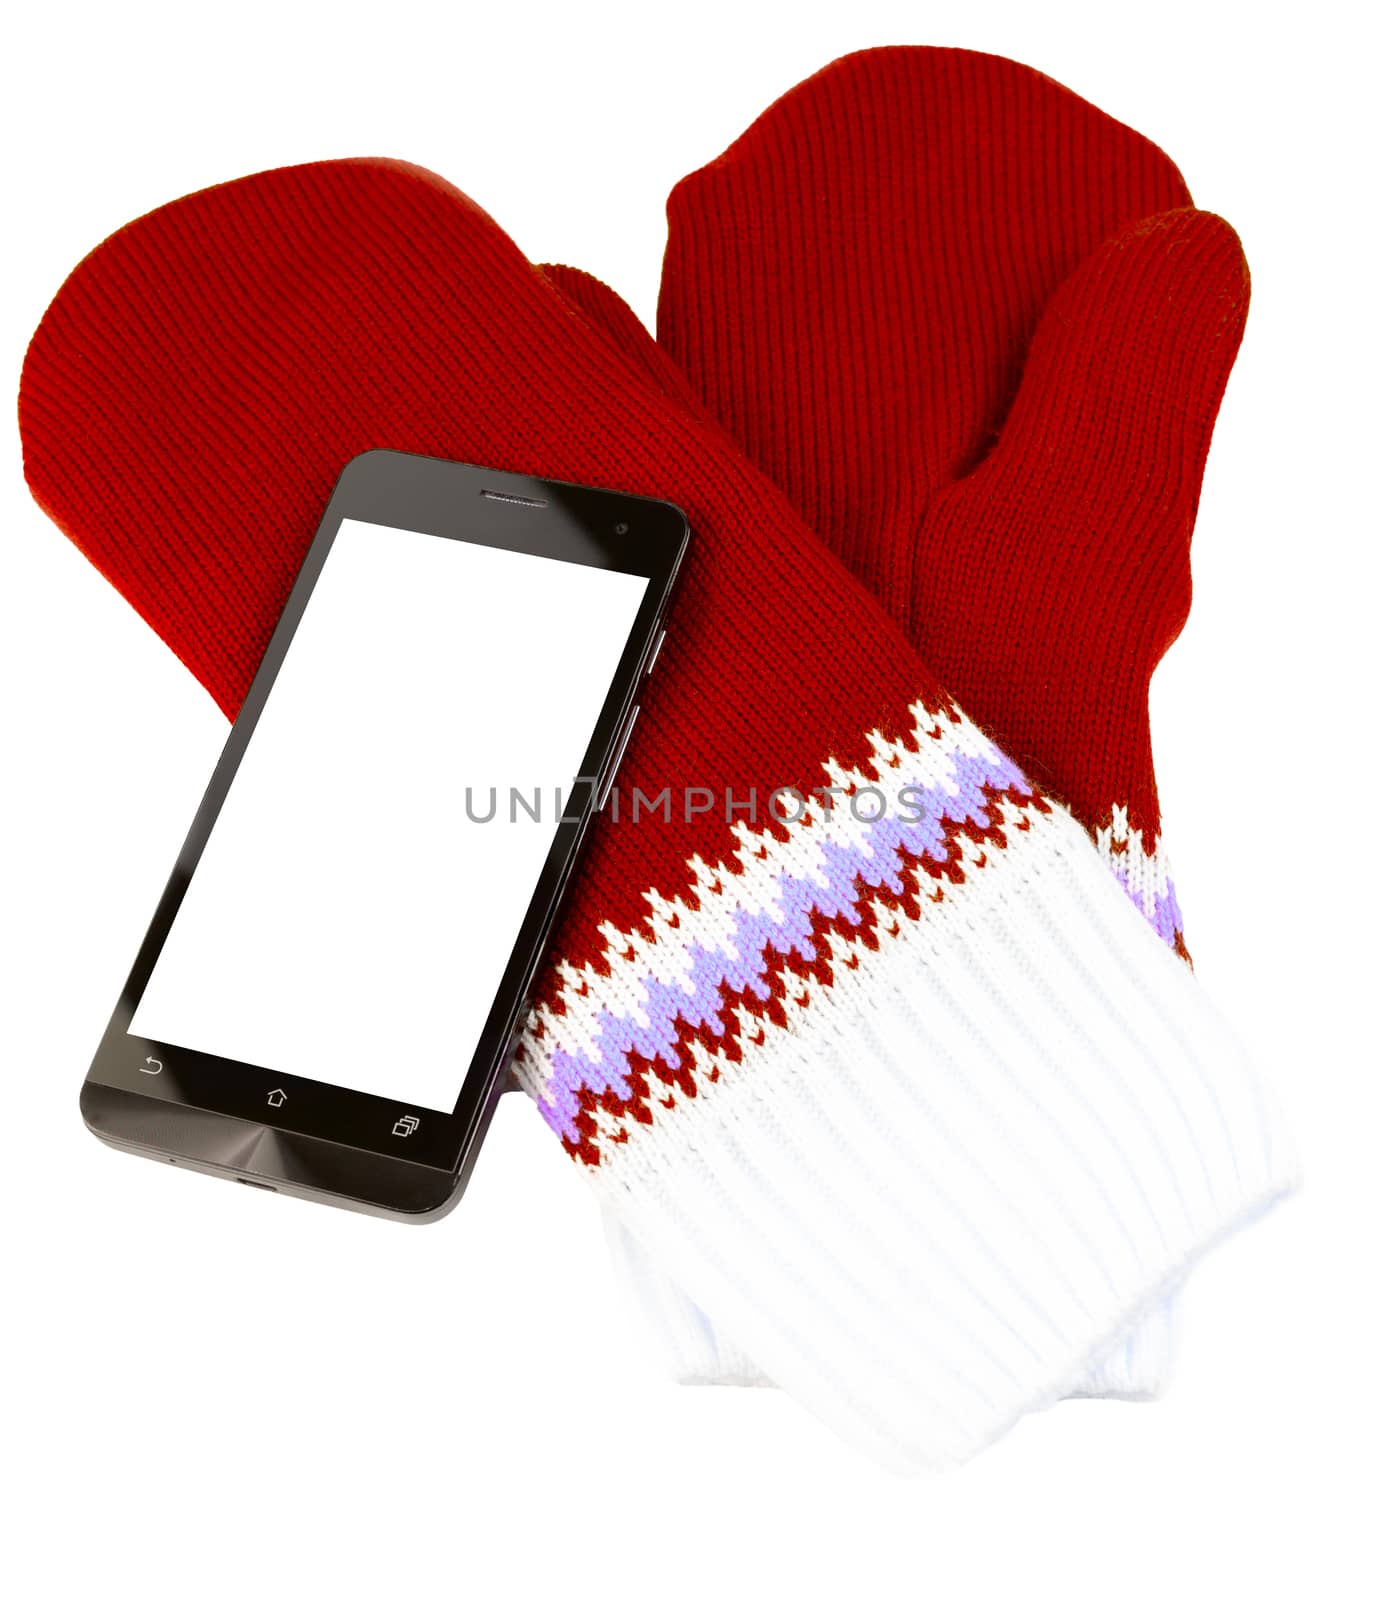 red and white knited mittens with cellphone isolated on white background.